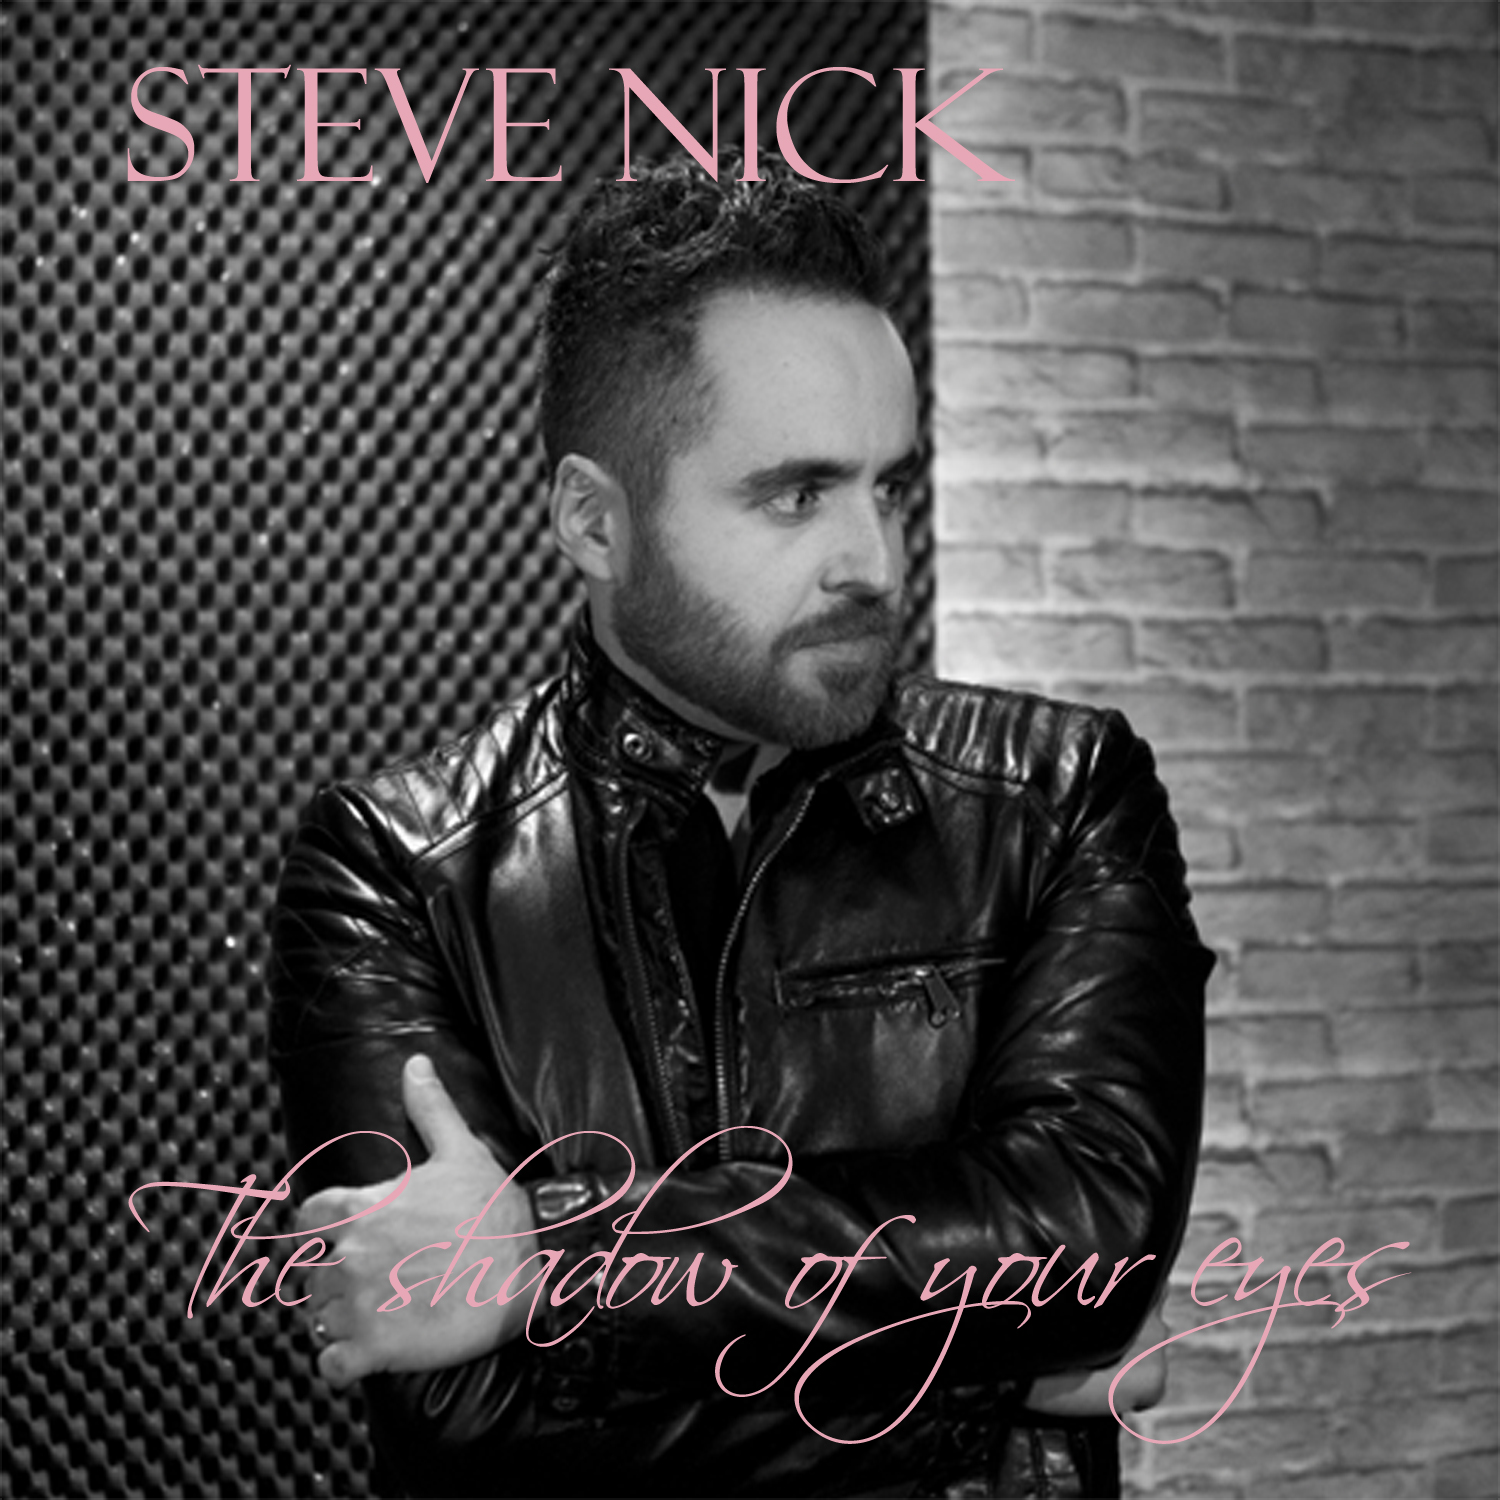  Steve Nick – “The Shadow Of Your Eyes”